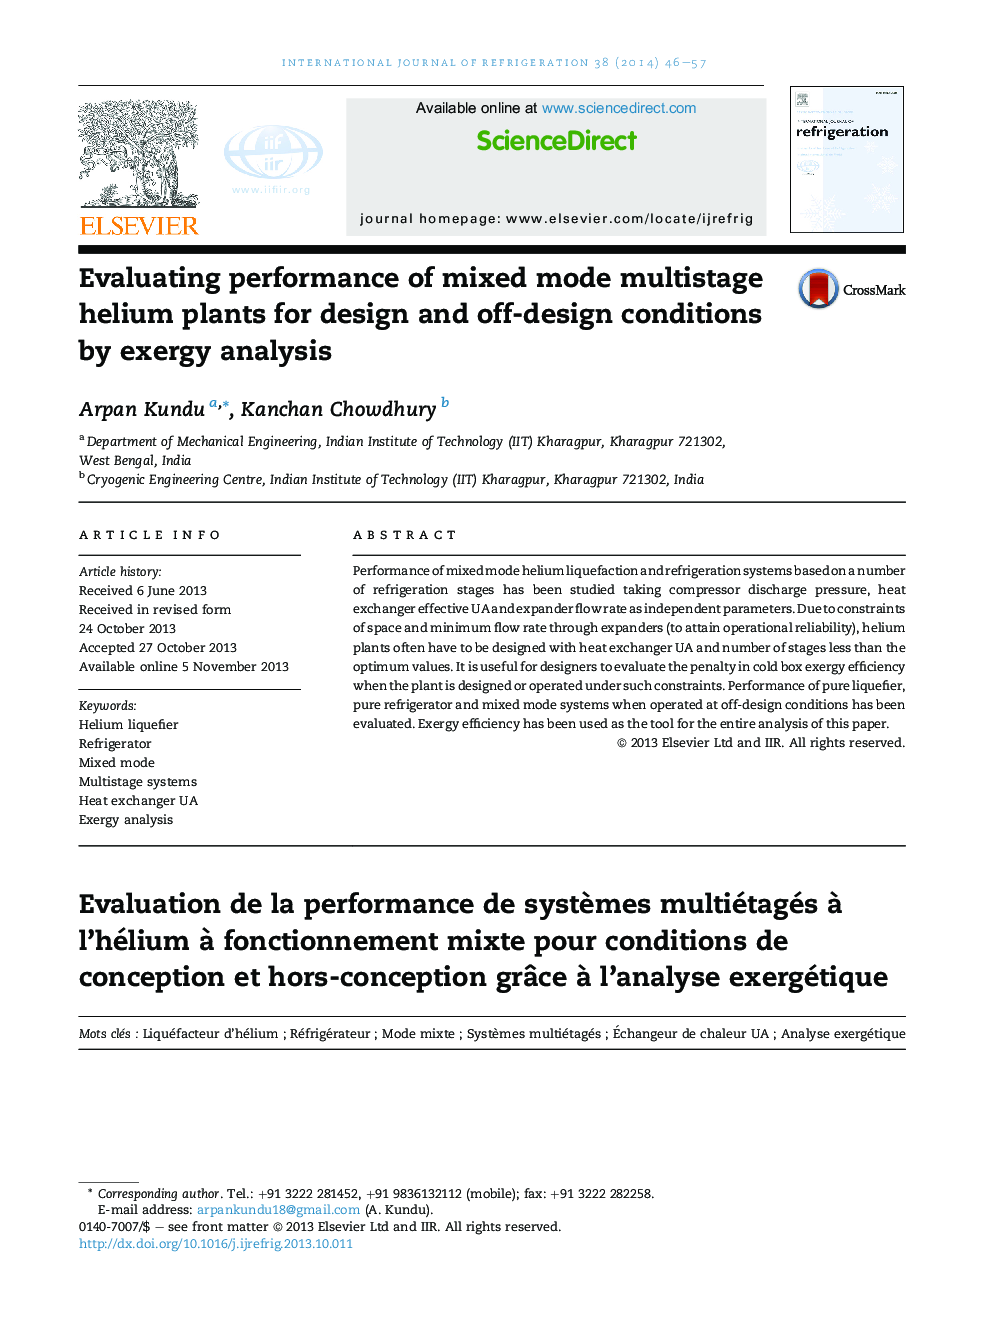 Evaluating performance of mixed mode multistage helium plants for design and off-design conditions by exergy analysis